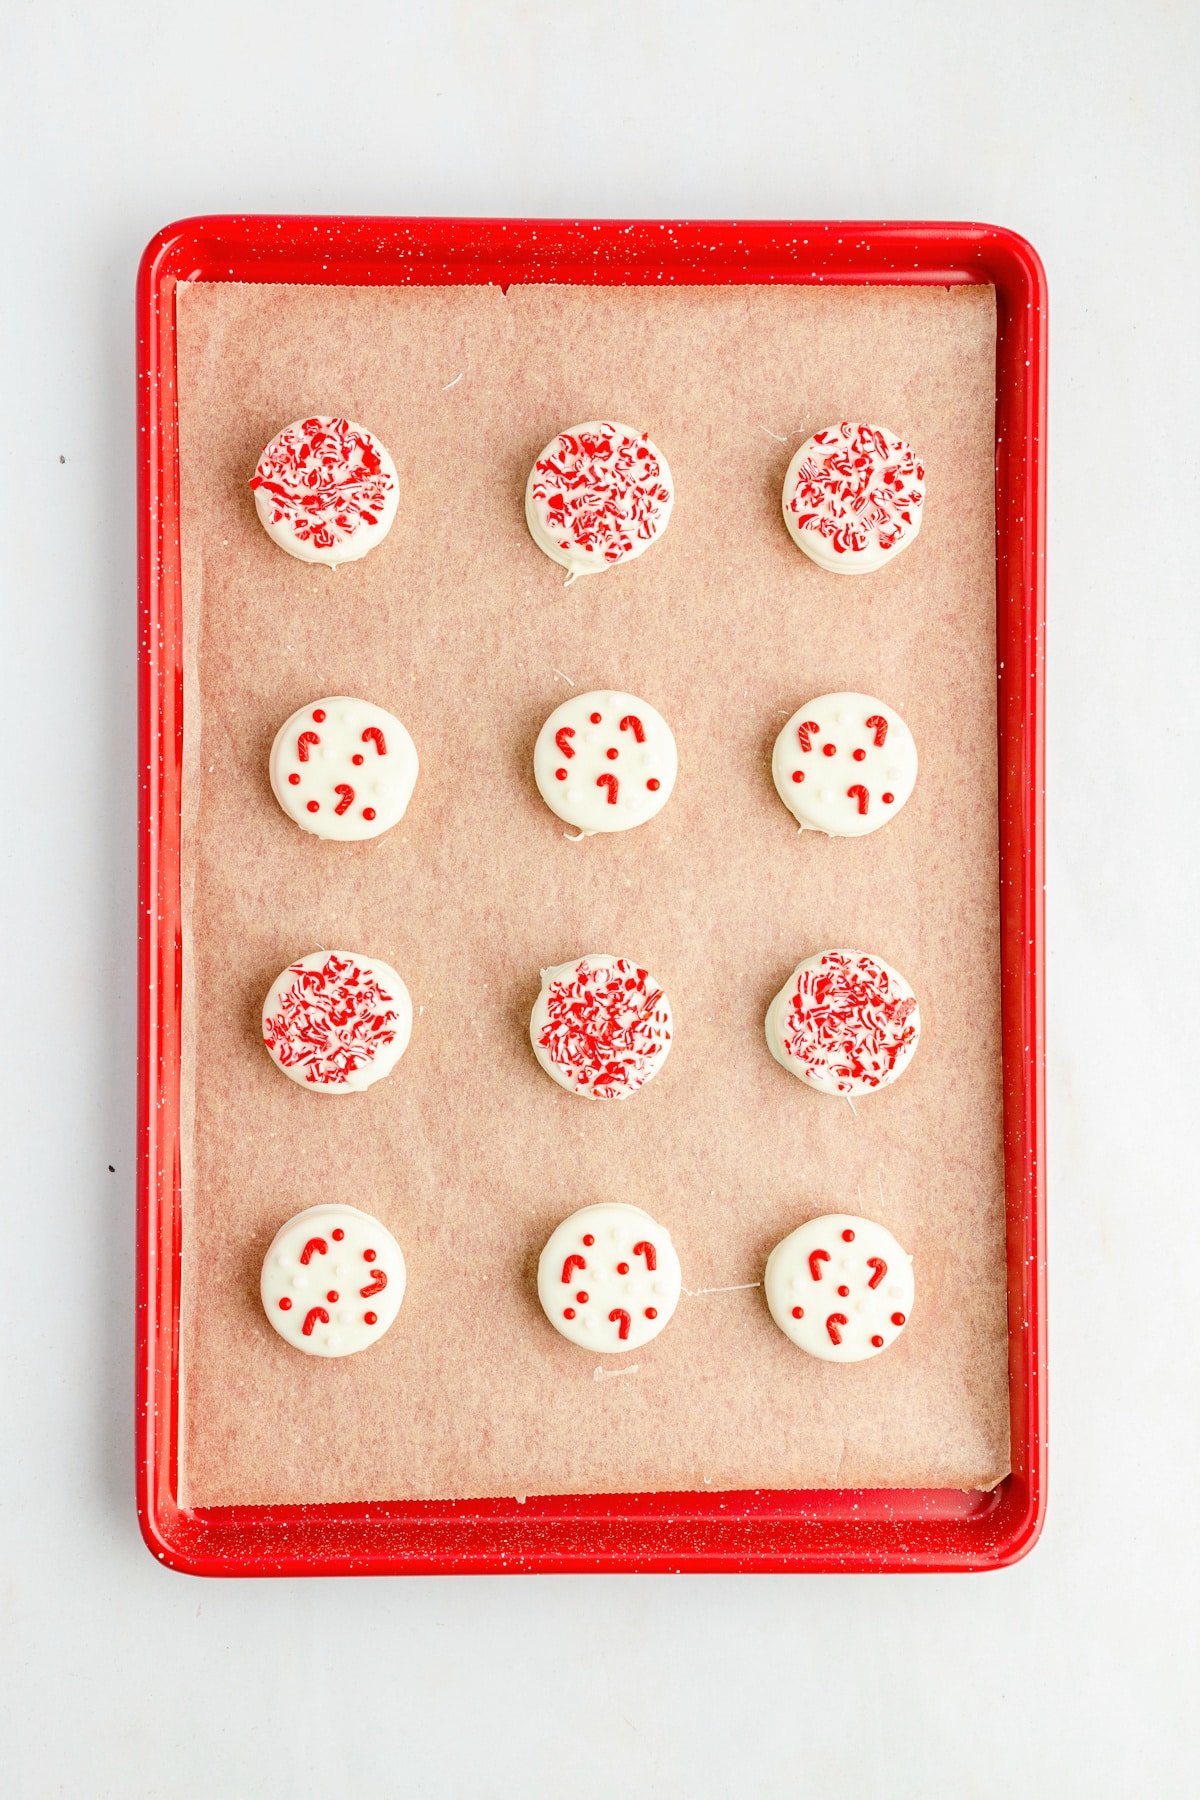 use red and white sprinkles for variety